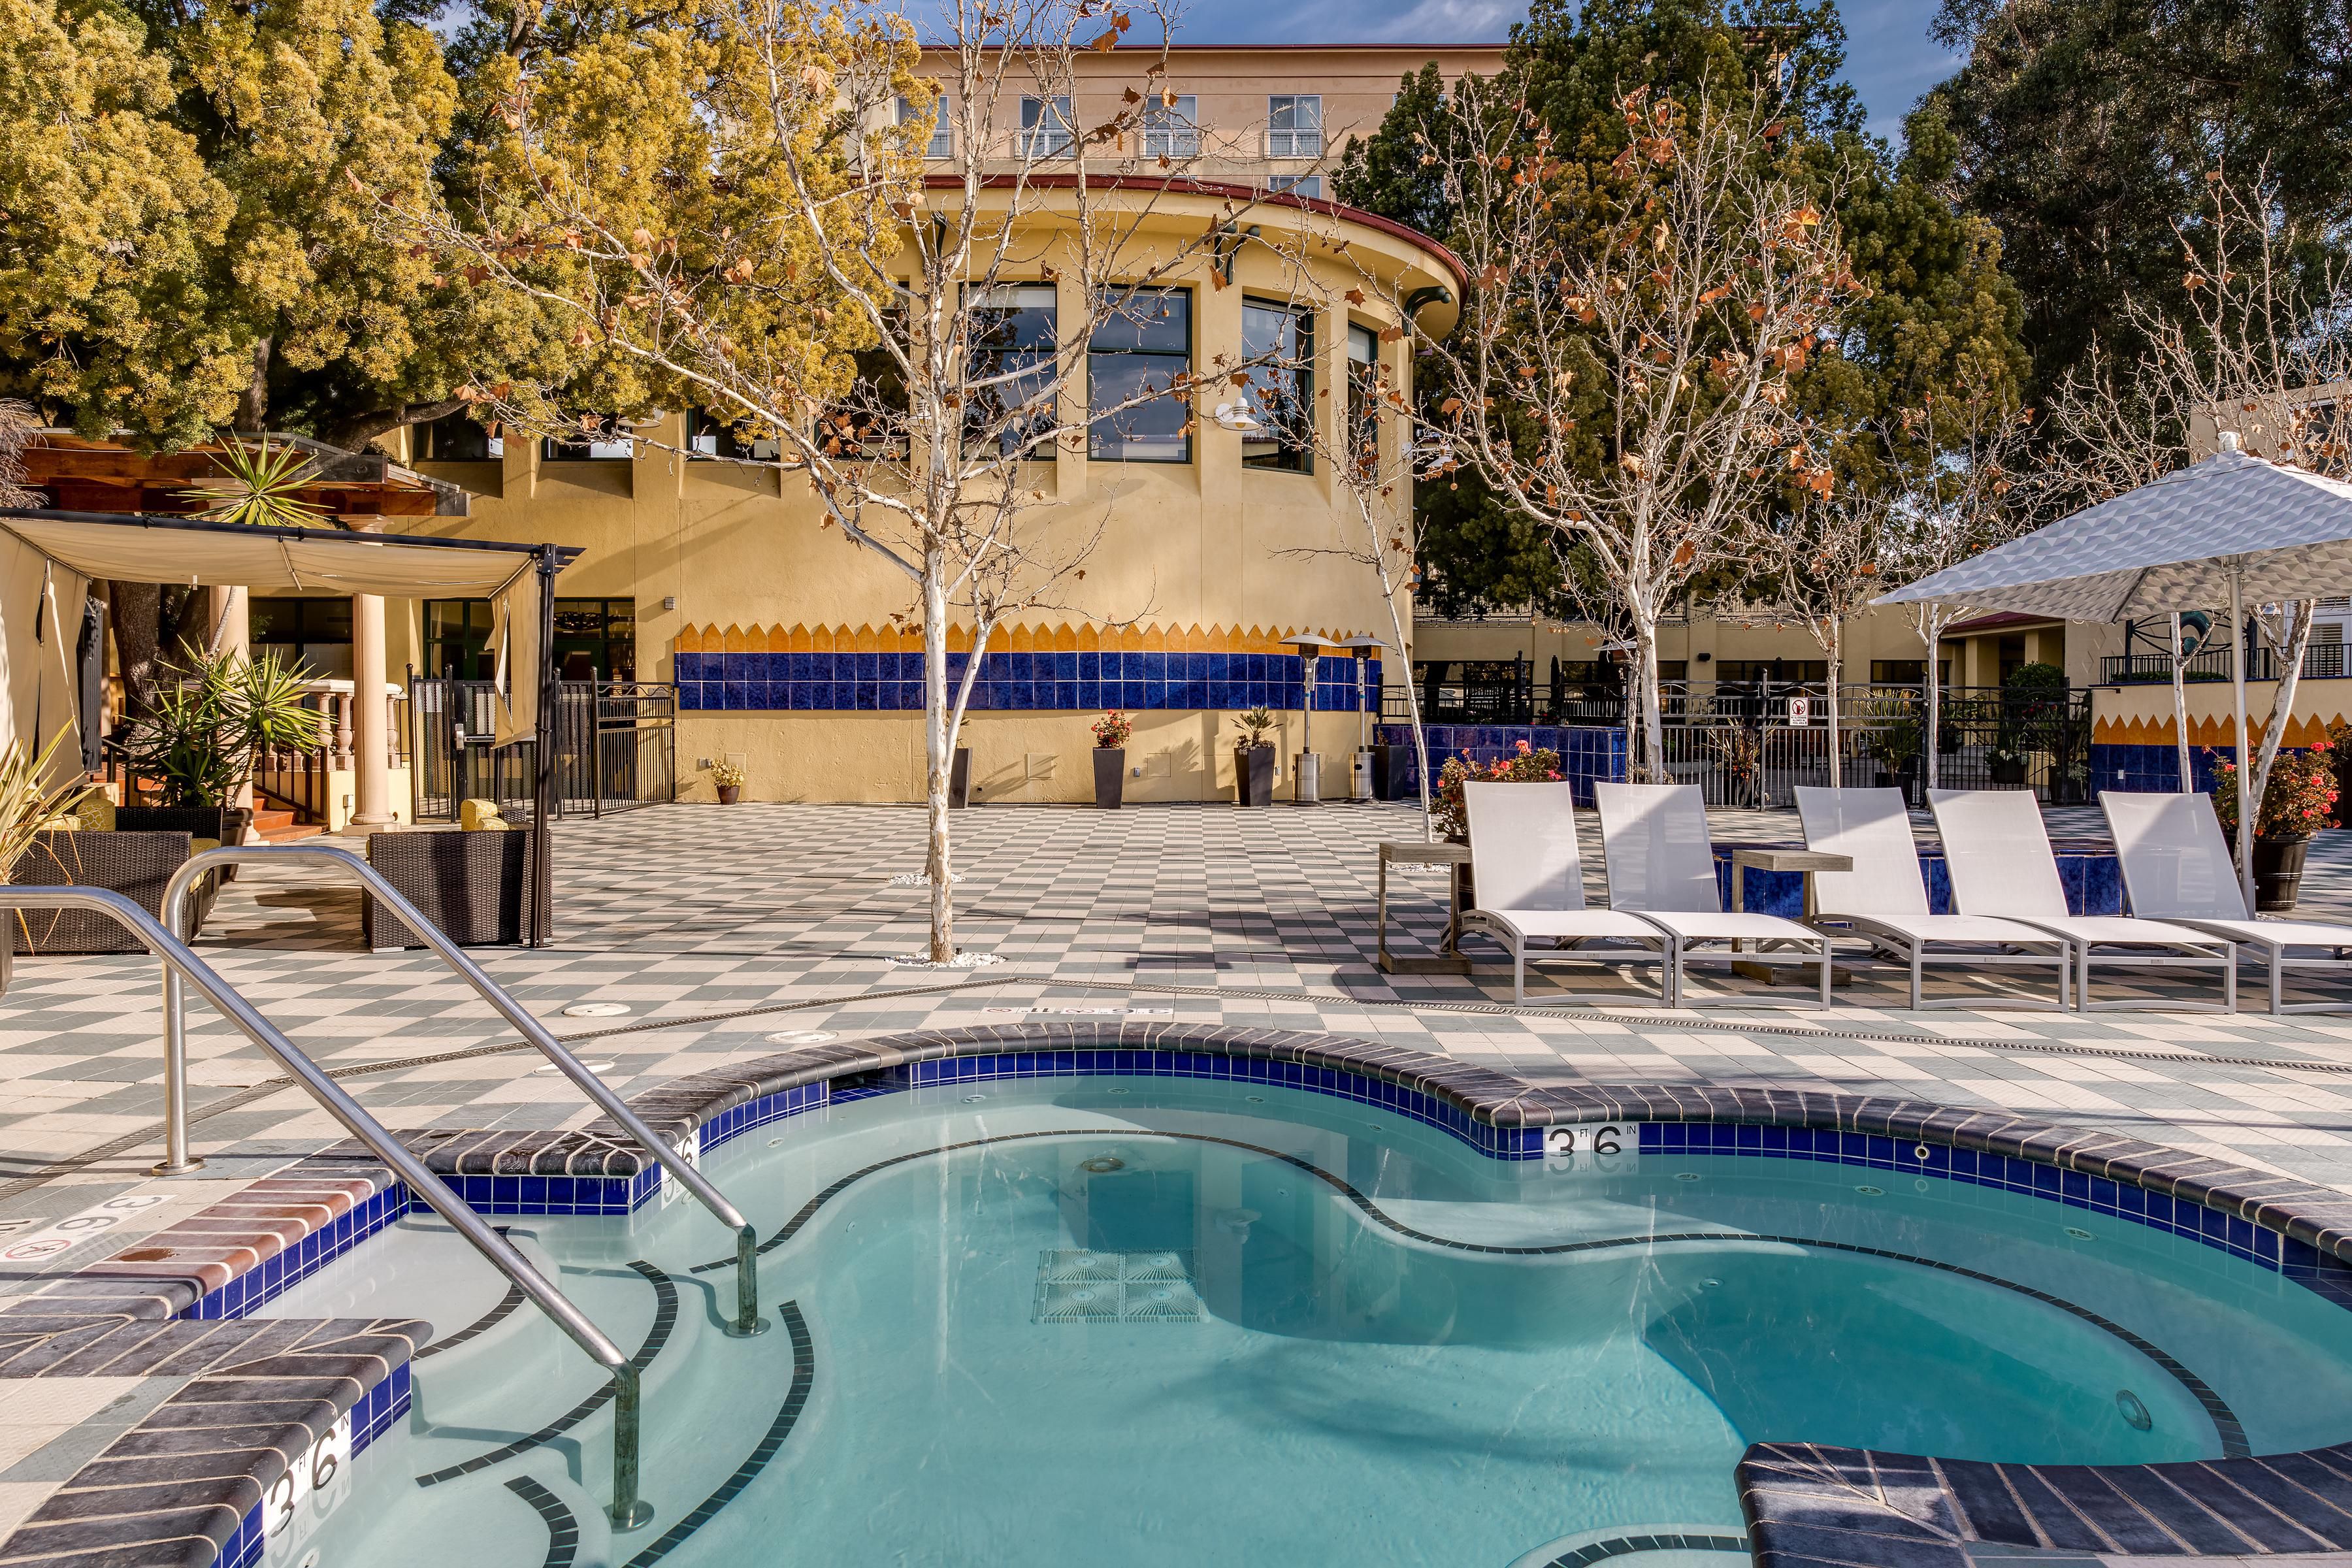 The largest pool deck in the area is available for private events